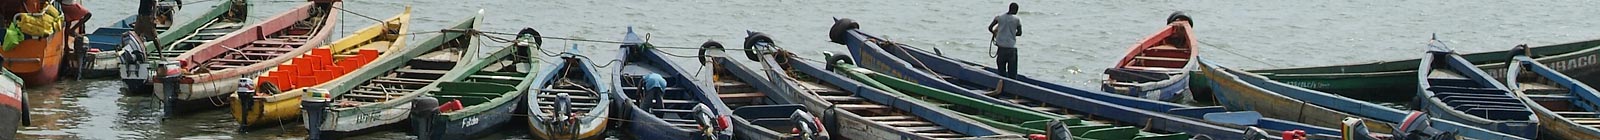 Conakry, small boats, pi rogues, in little harbour, for departure to the islands of Kassa Guinea, Guinee.